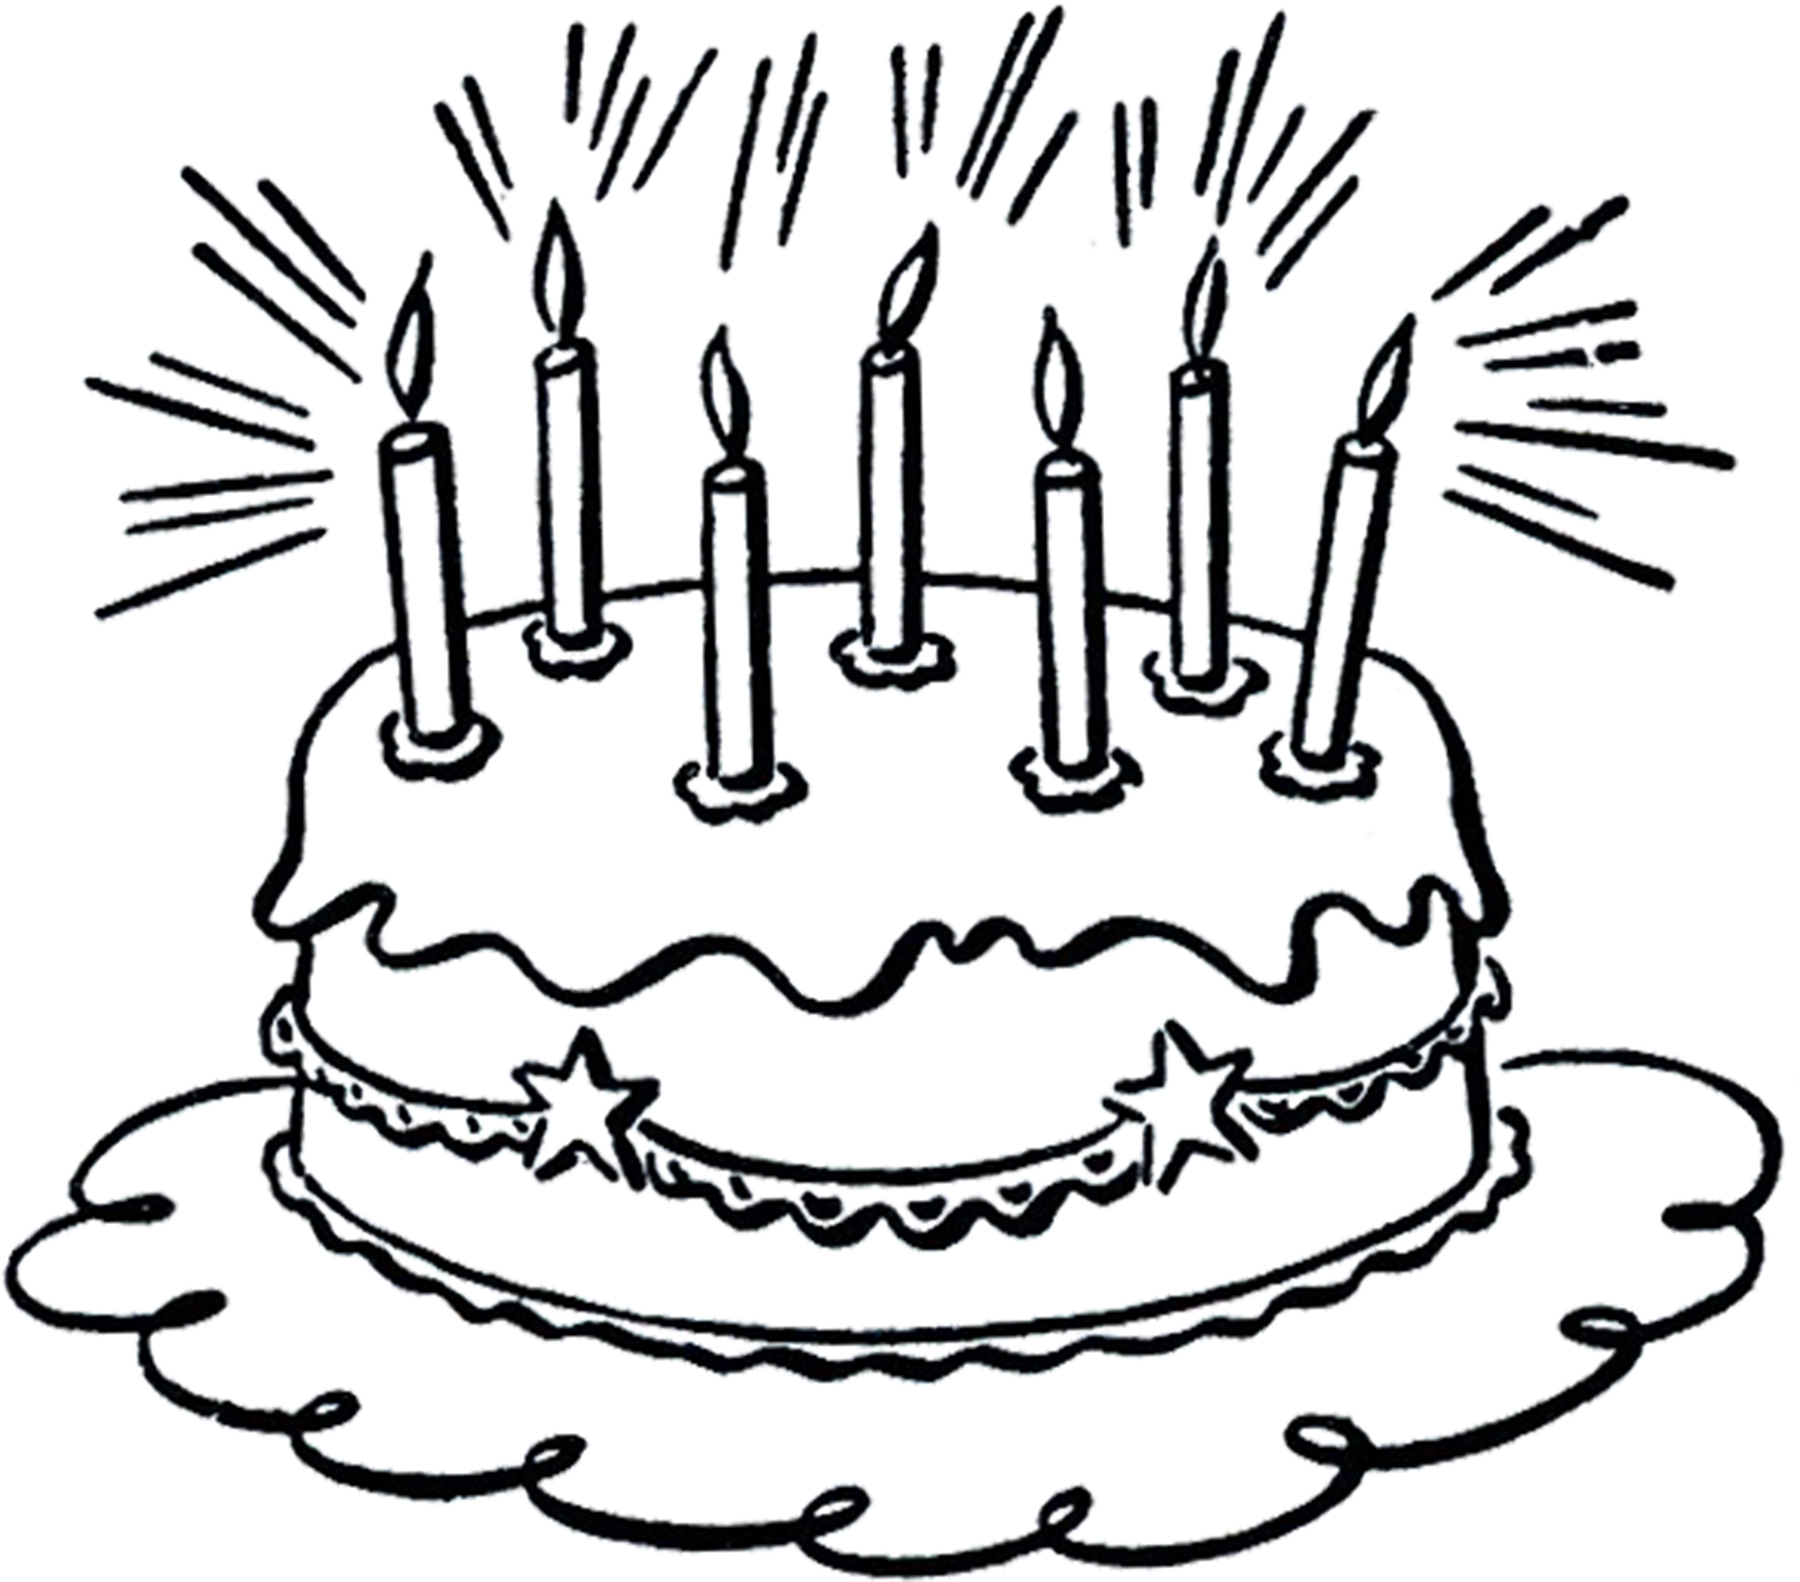 Free Clip art of Birthday Cake Clipart Black and White 3514 Best 